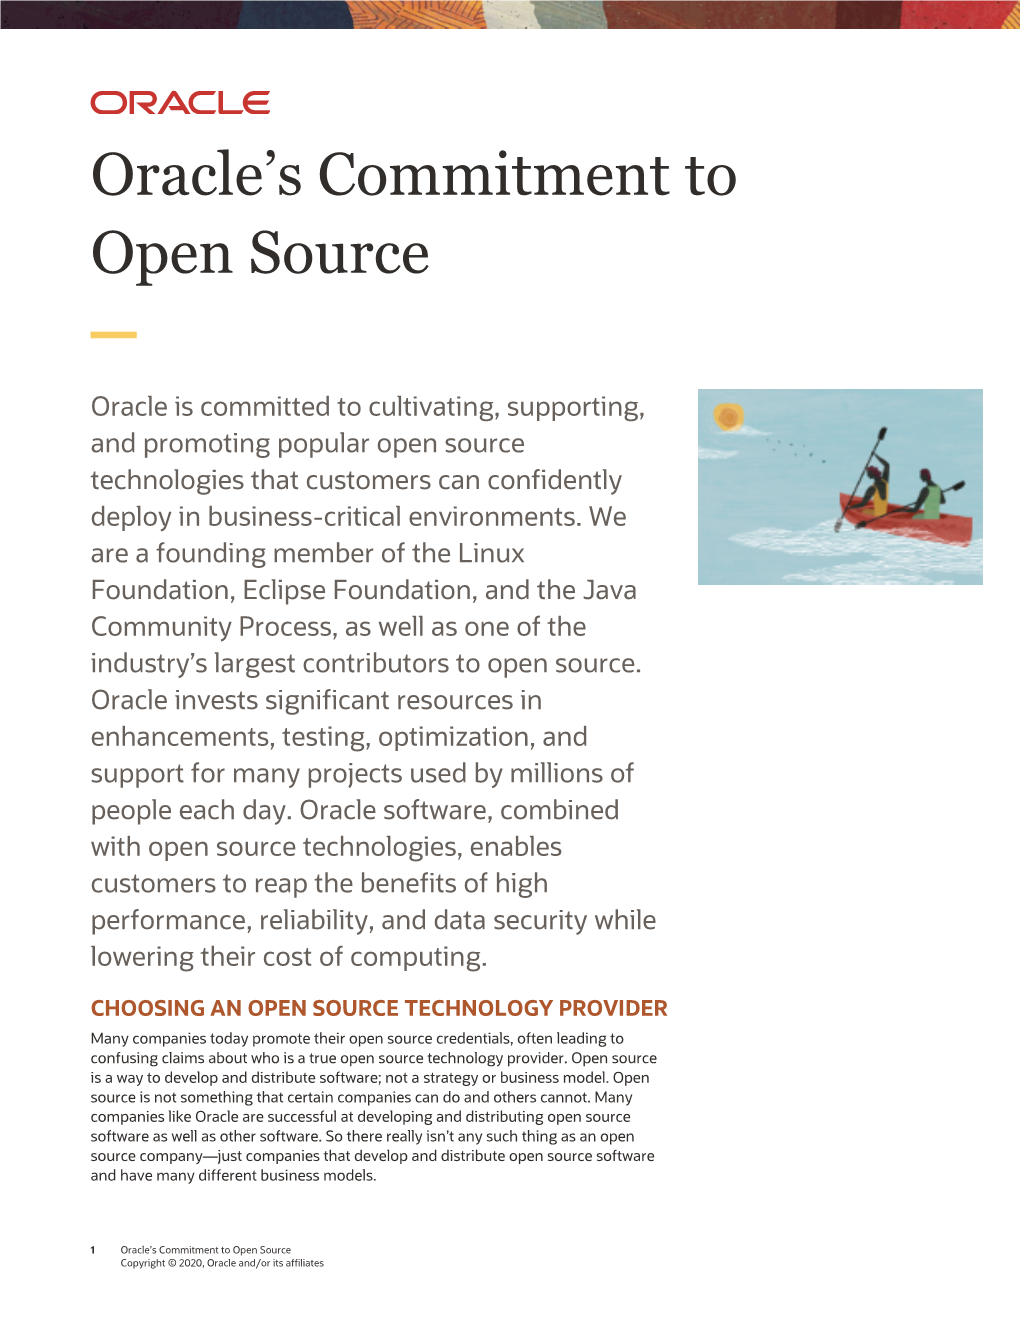 Oracle's Commitment to Open Source